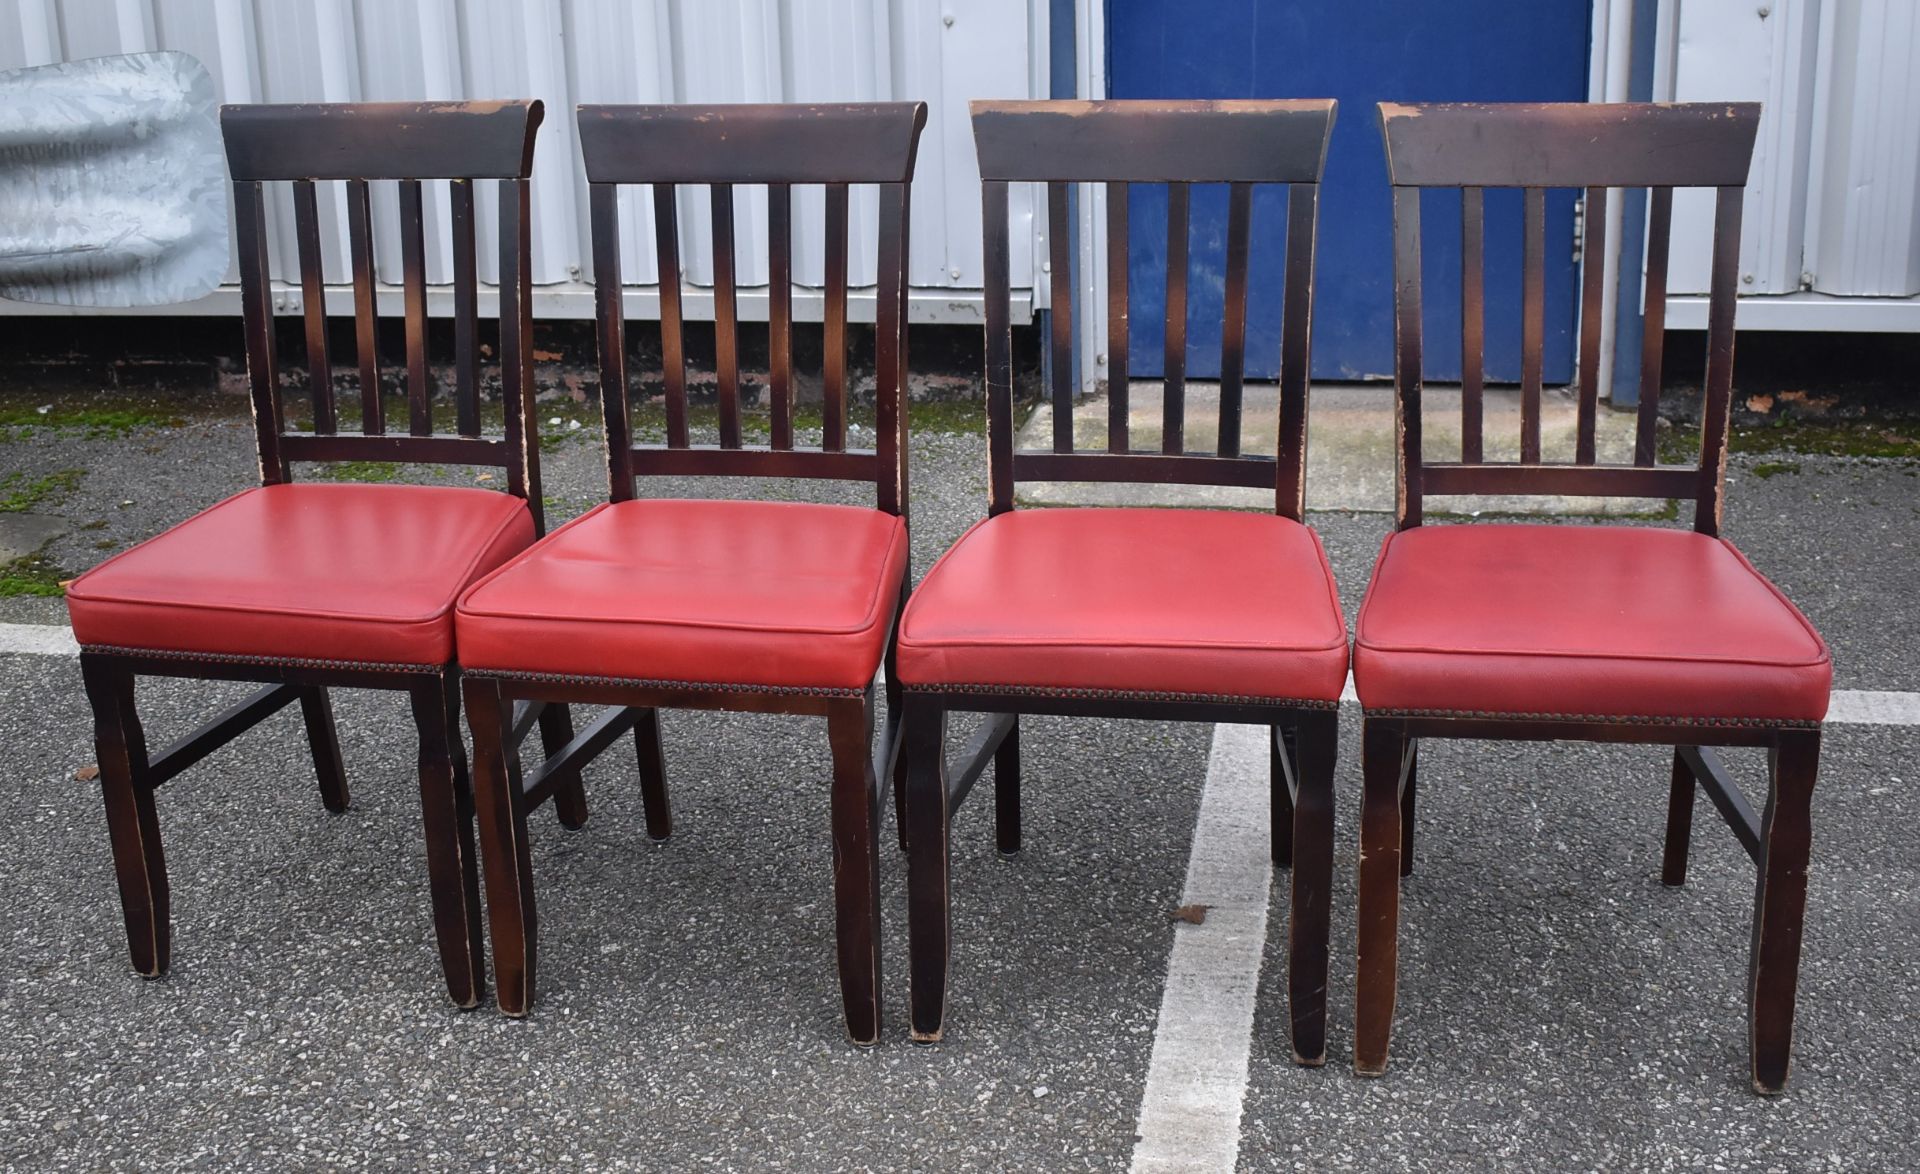 8 x Restaurant Dining Chairs With Dark Stained Wood Finish and Red Leather Seat Pads - Image 2 of 6